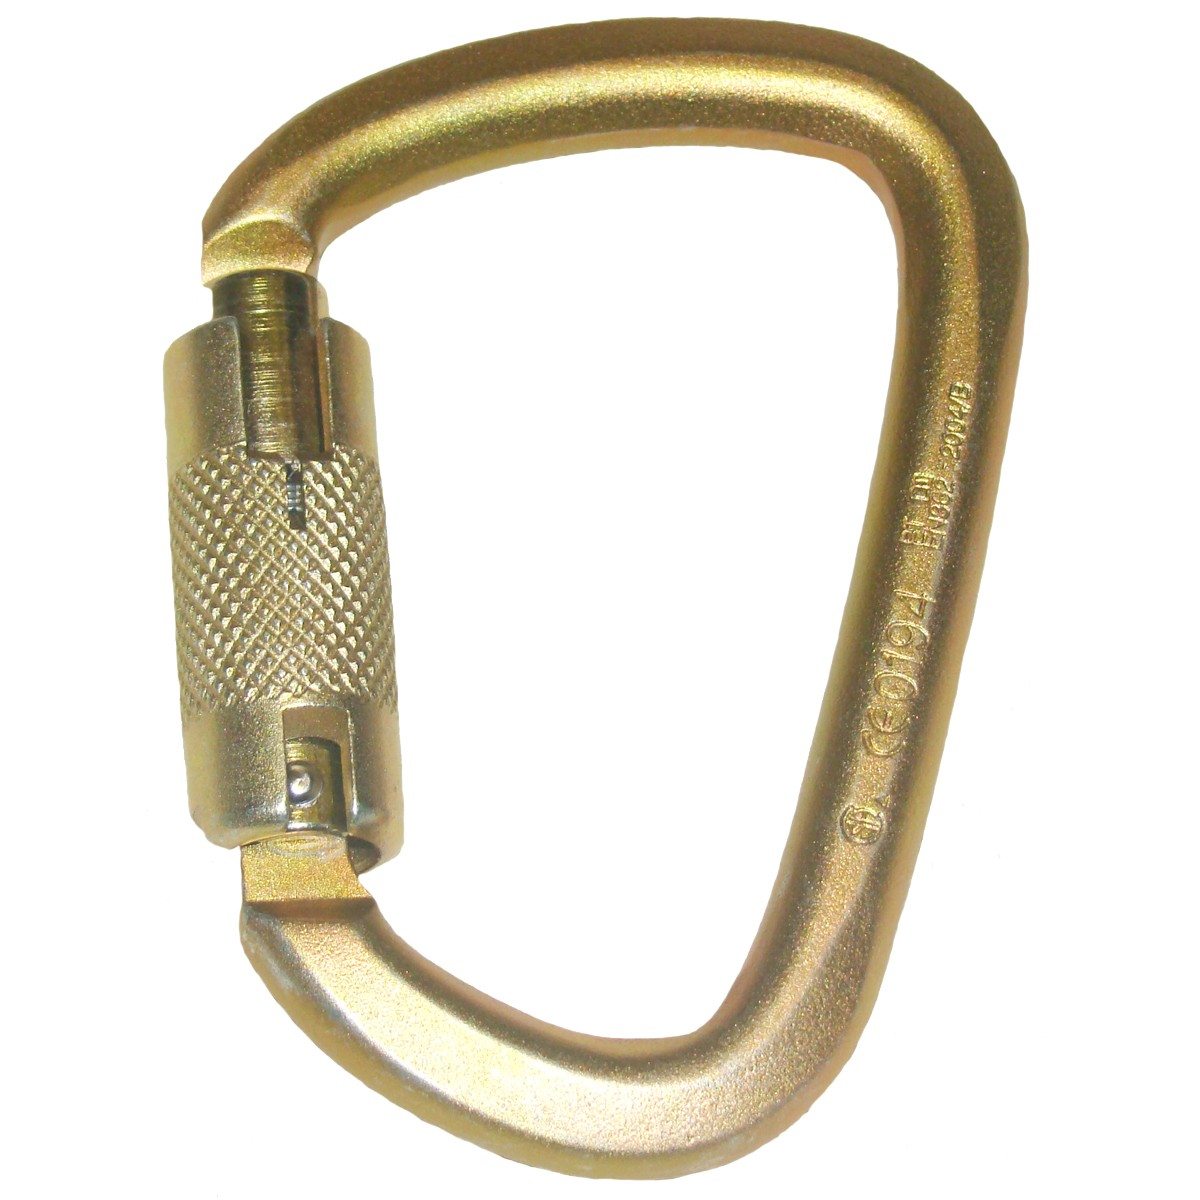 Buckingham Steel Triple Action Carabiner from Columbia Safety